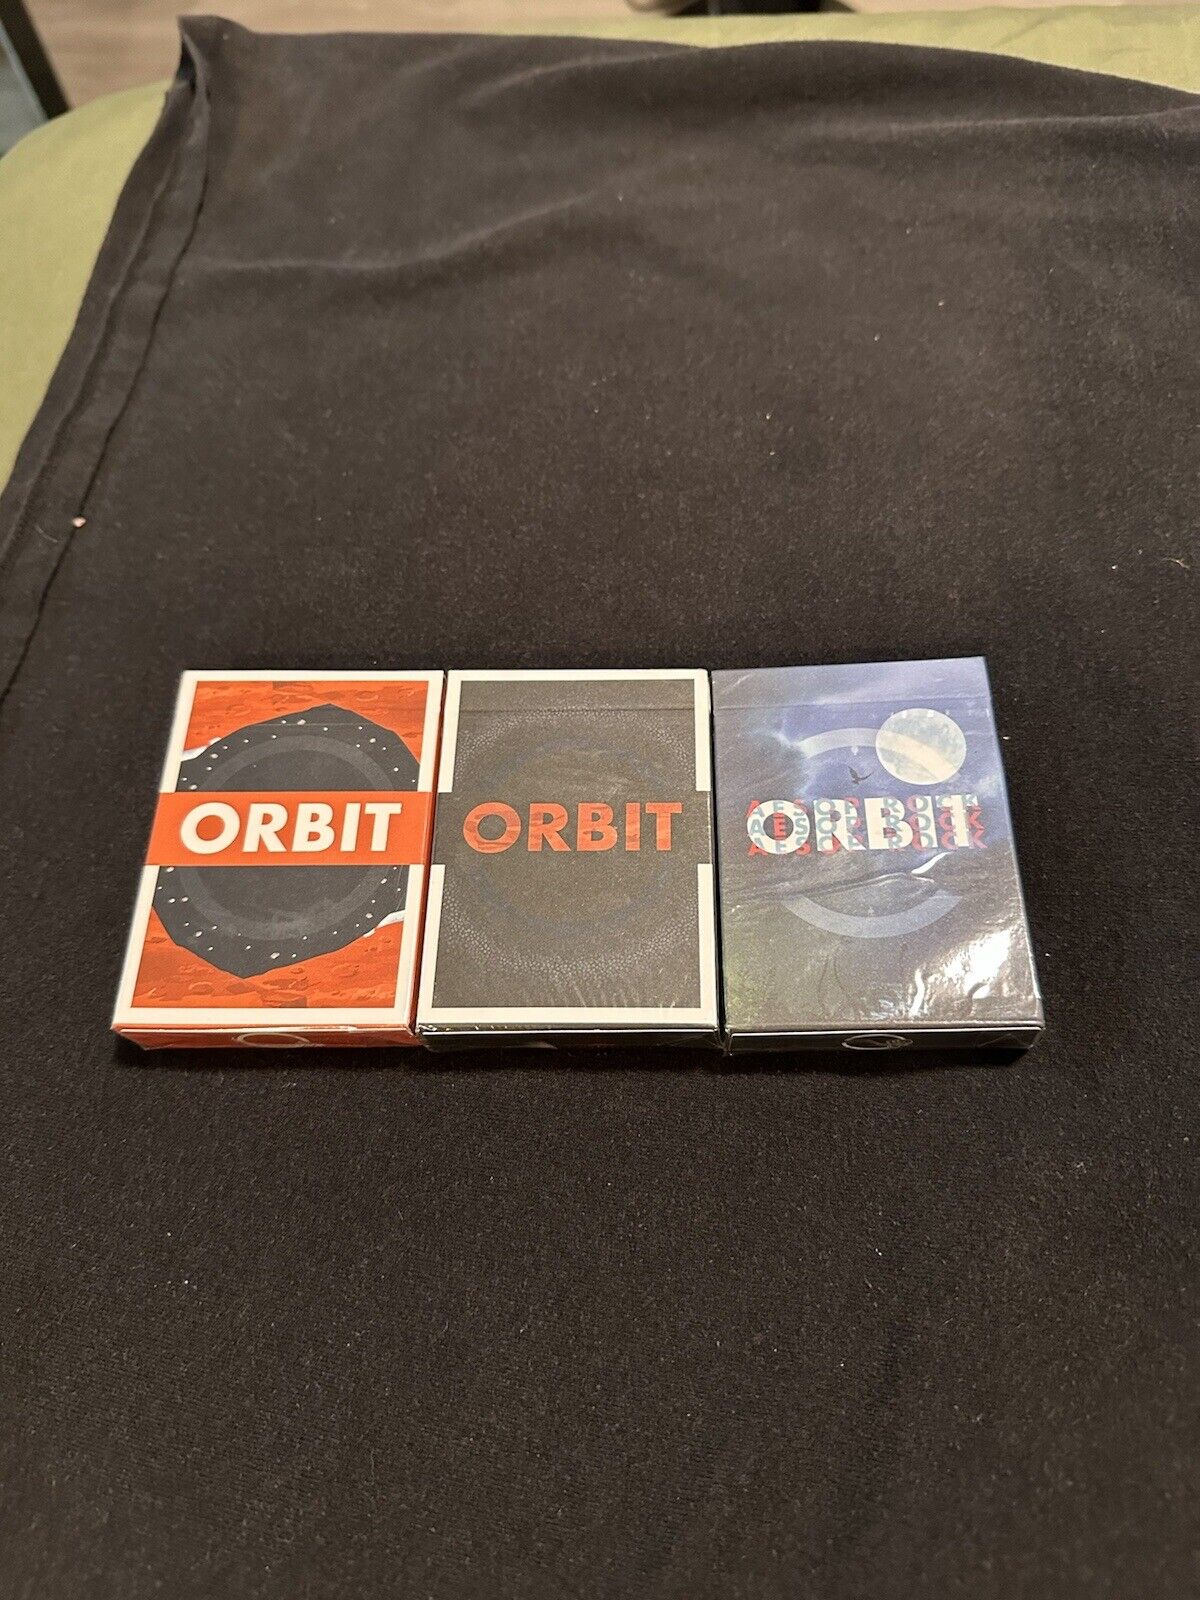 Orbit Playing Cards Lot Of 3 (V8, V8 Parallel, And Aesop Rock) All New/Sealed